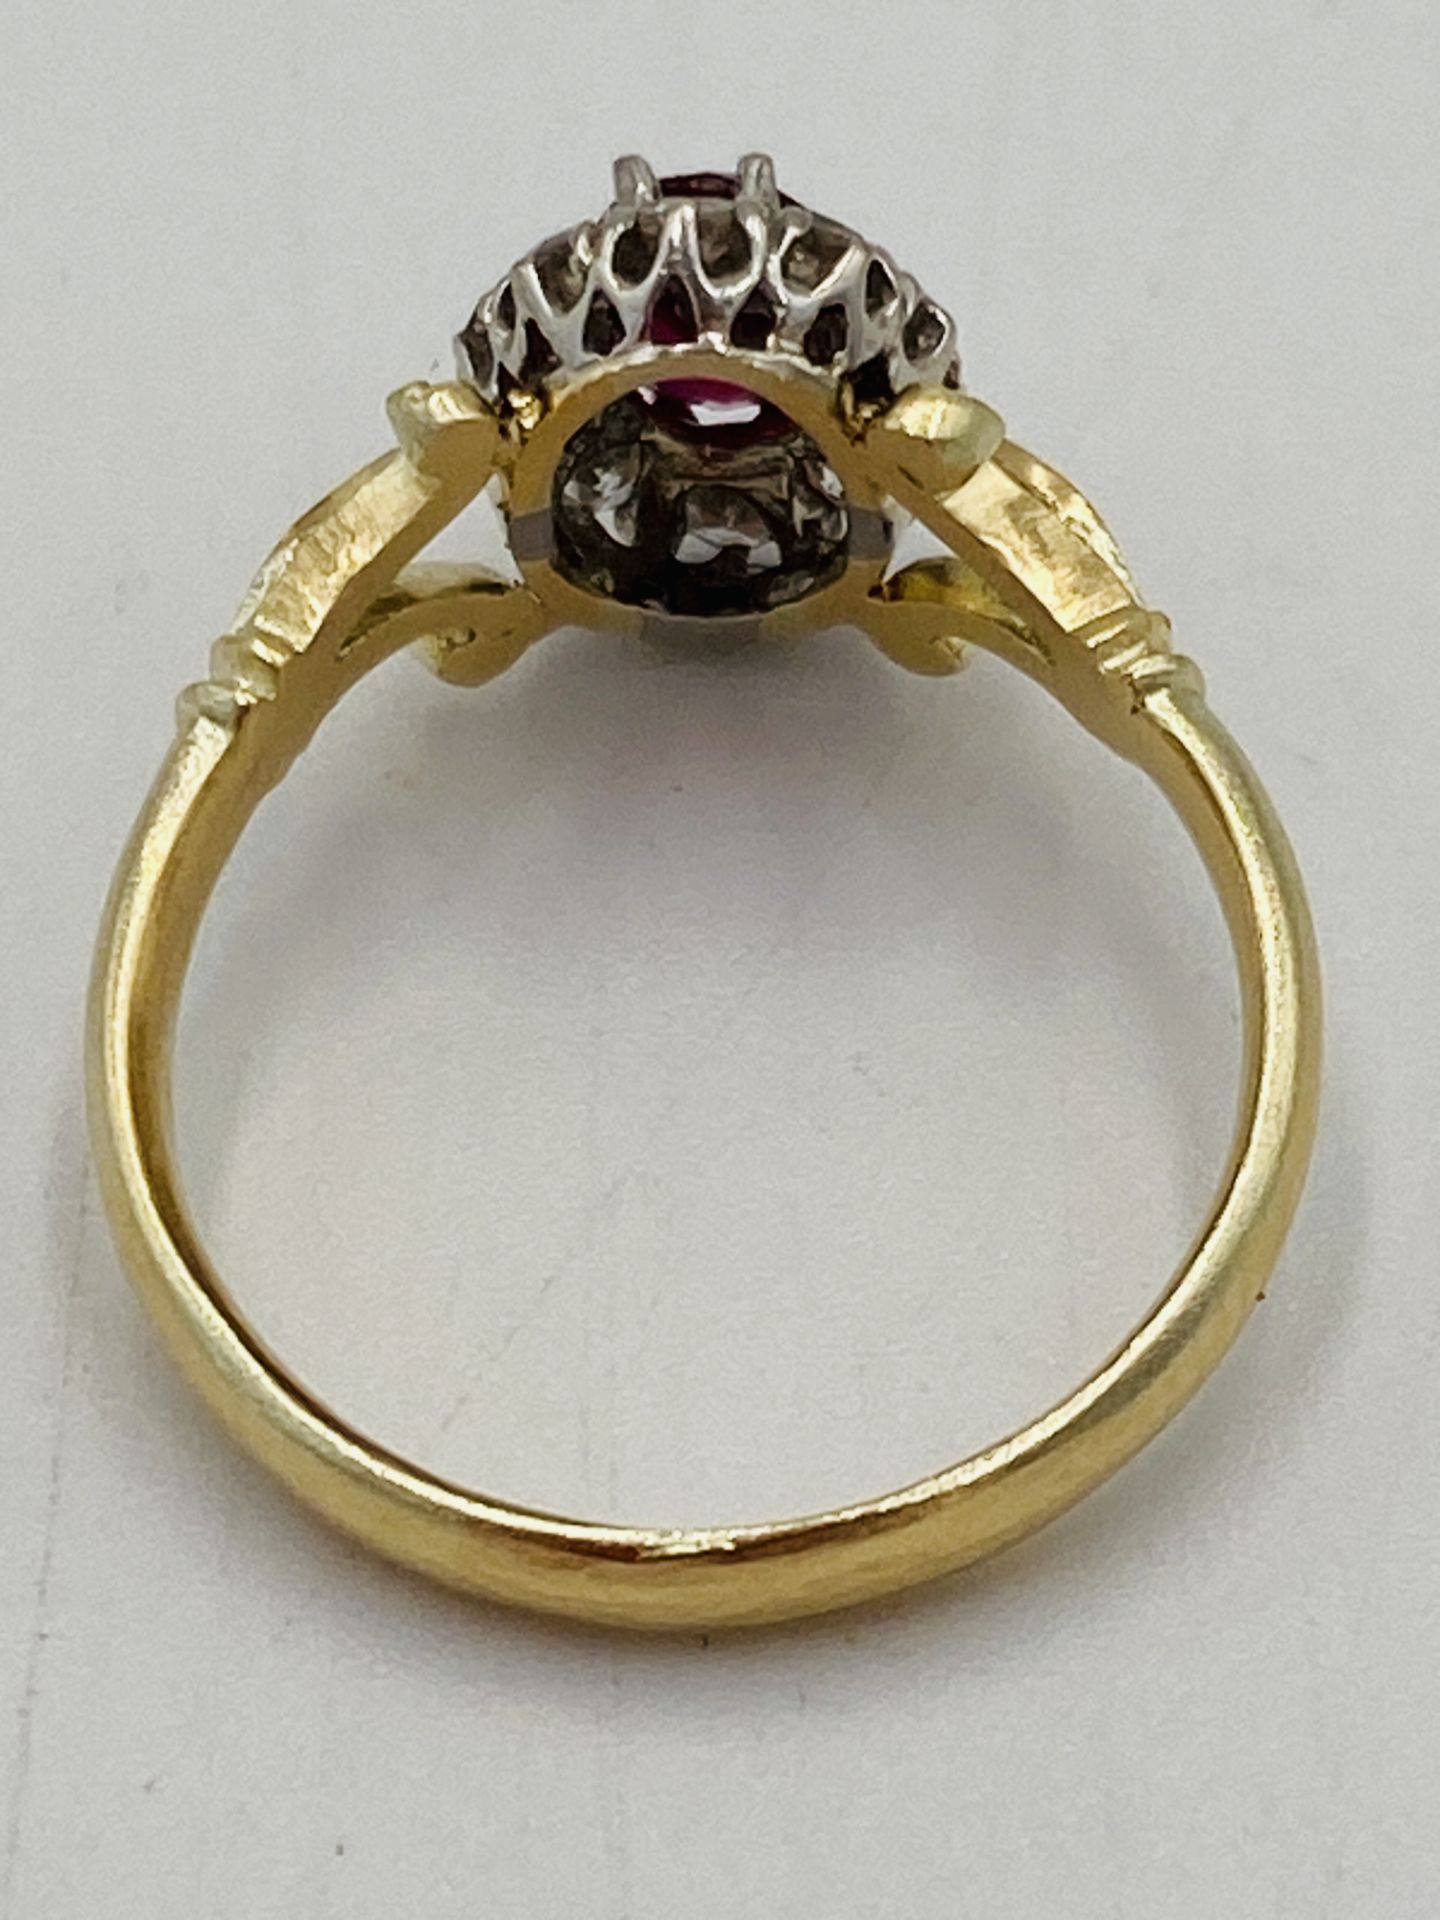 Gold ring set with central ruby and diamond surround - Image 4 of 6